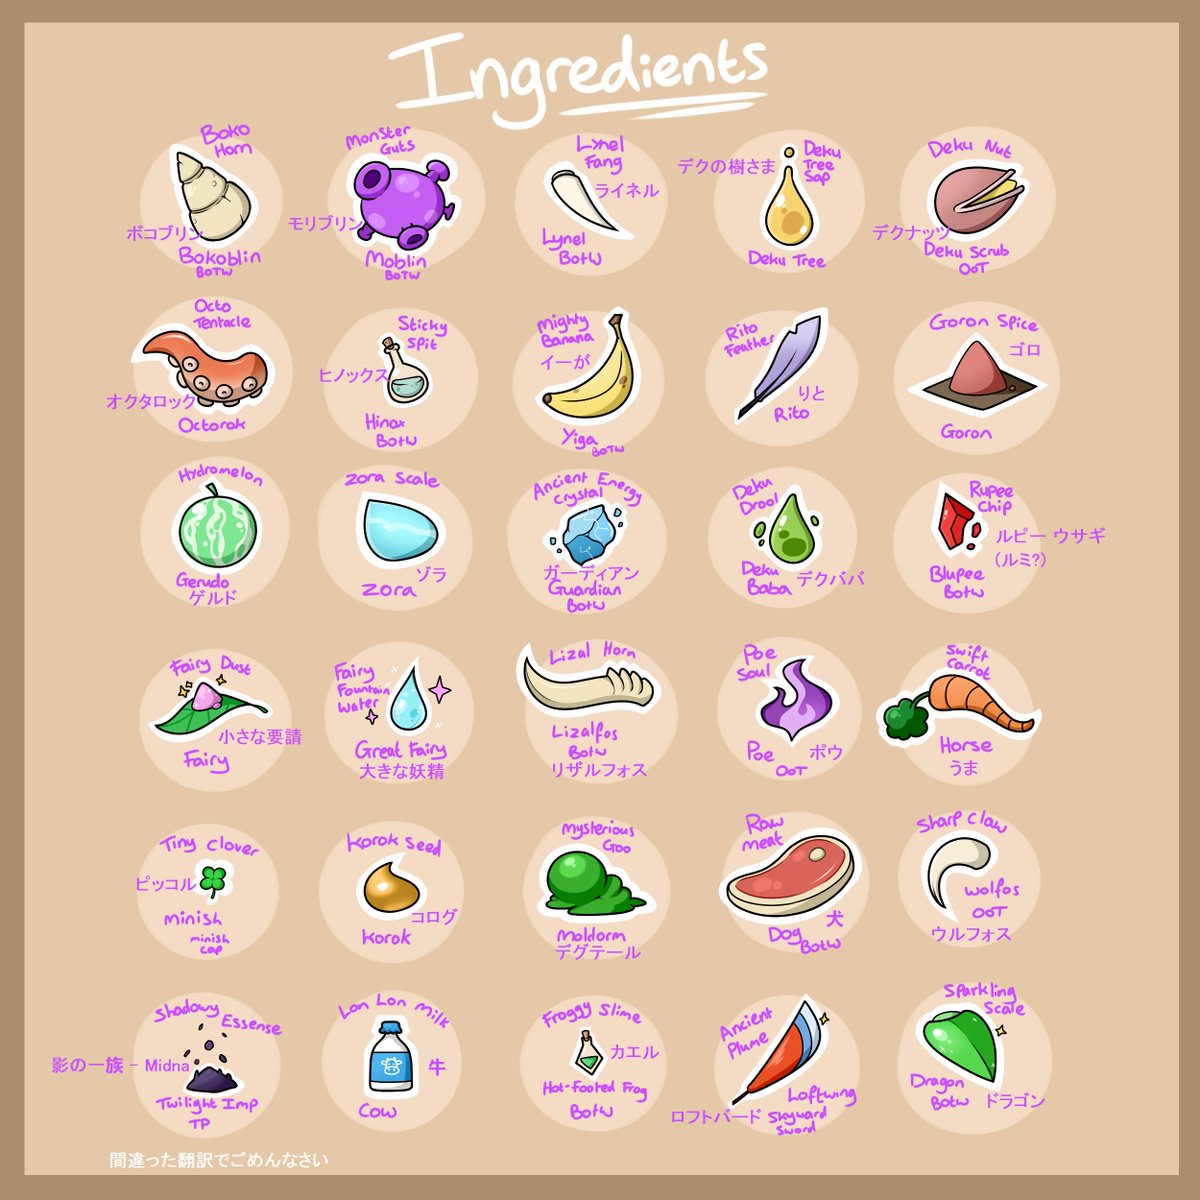 Zelda is experimenting with potion making in order to find out the properties of various materials from Hyrule! Here is a list of potential ingredients.Please message me and tell me which ones you are interested in drawing or writing a TF piece for! One slot available for each!